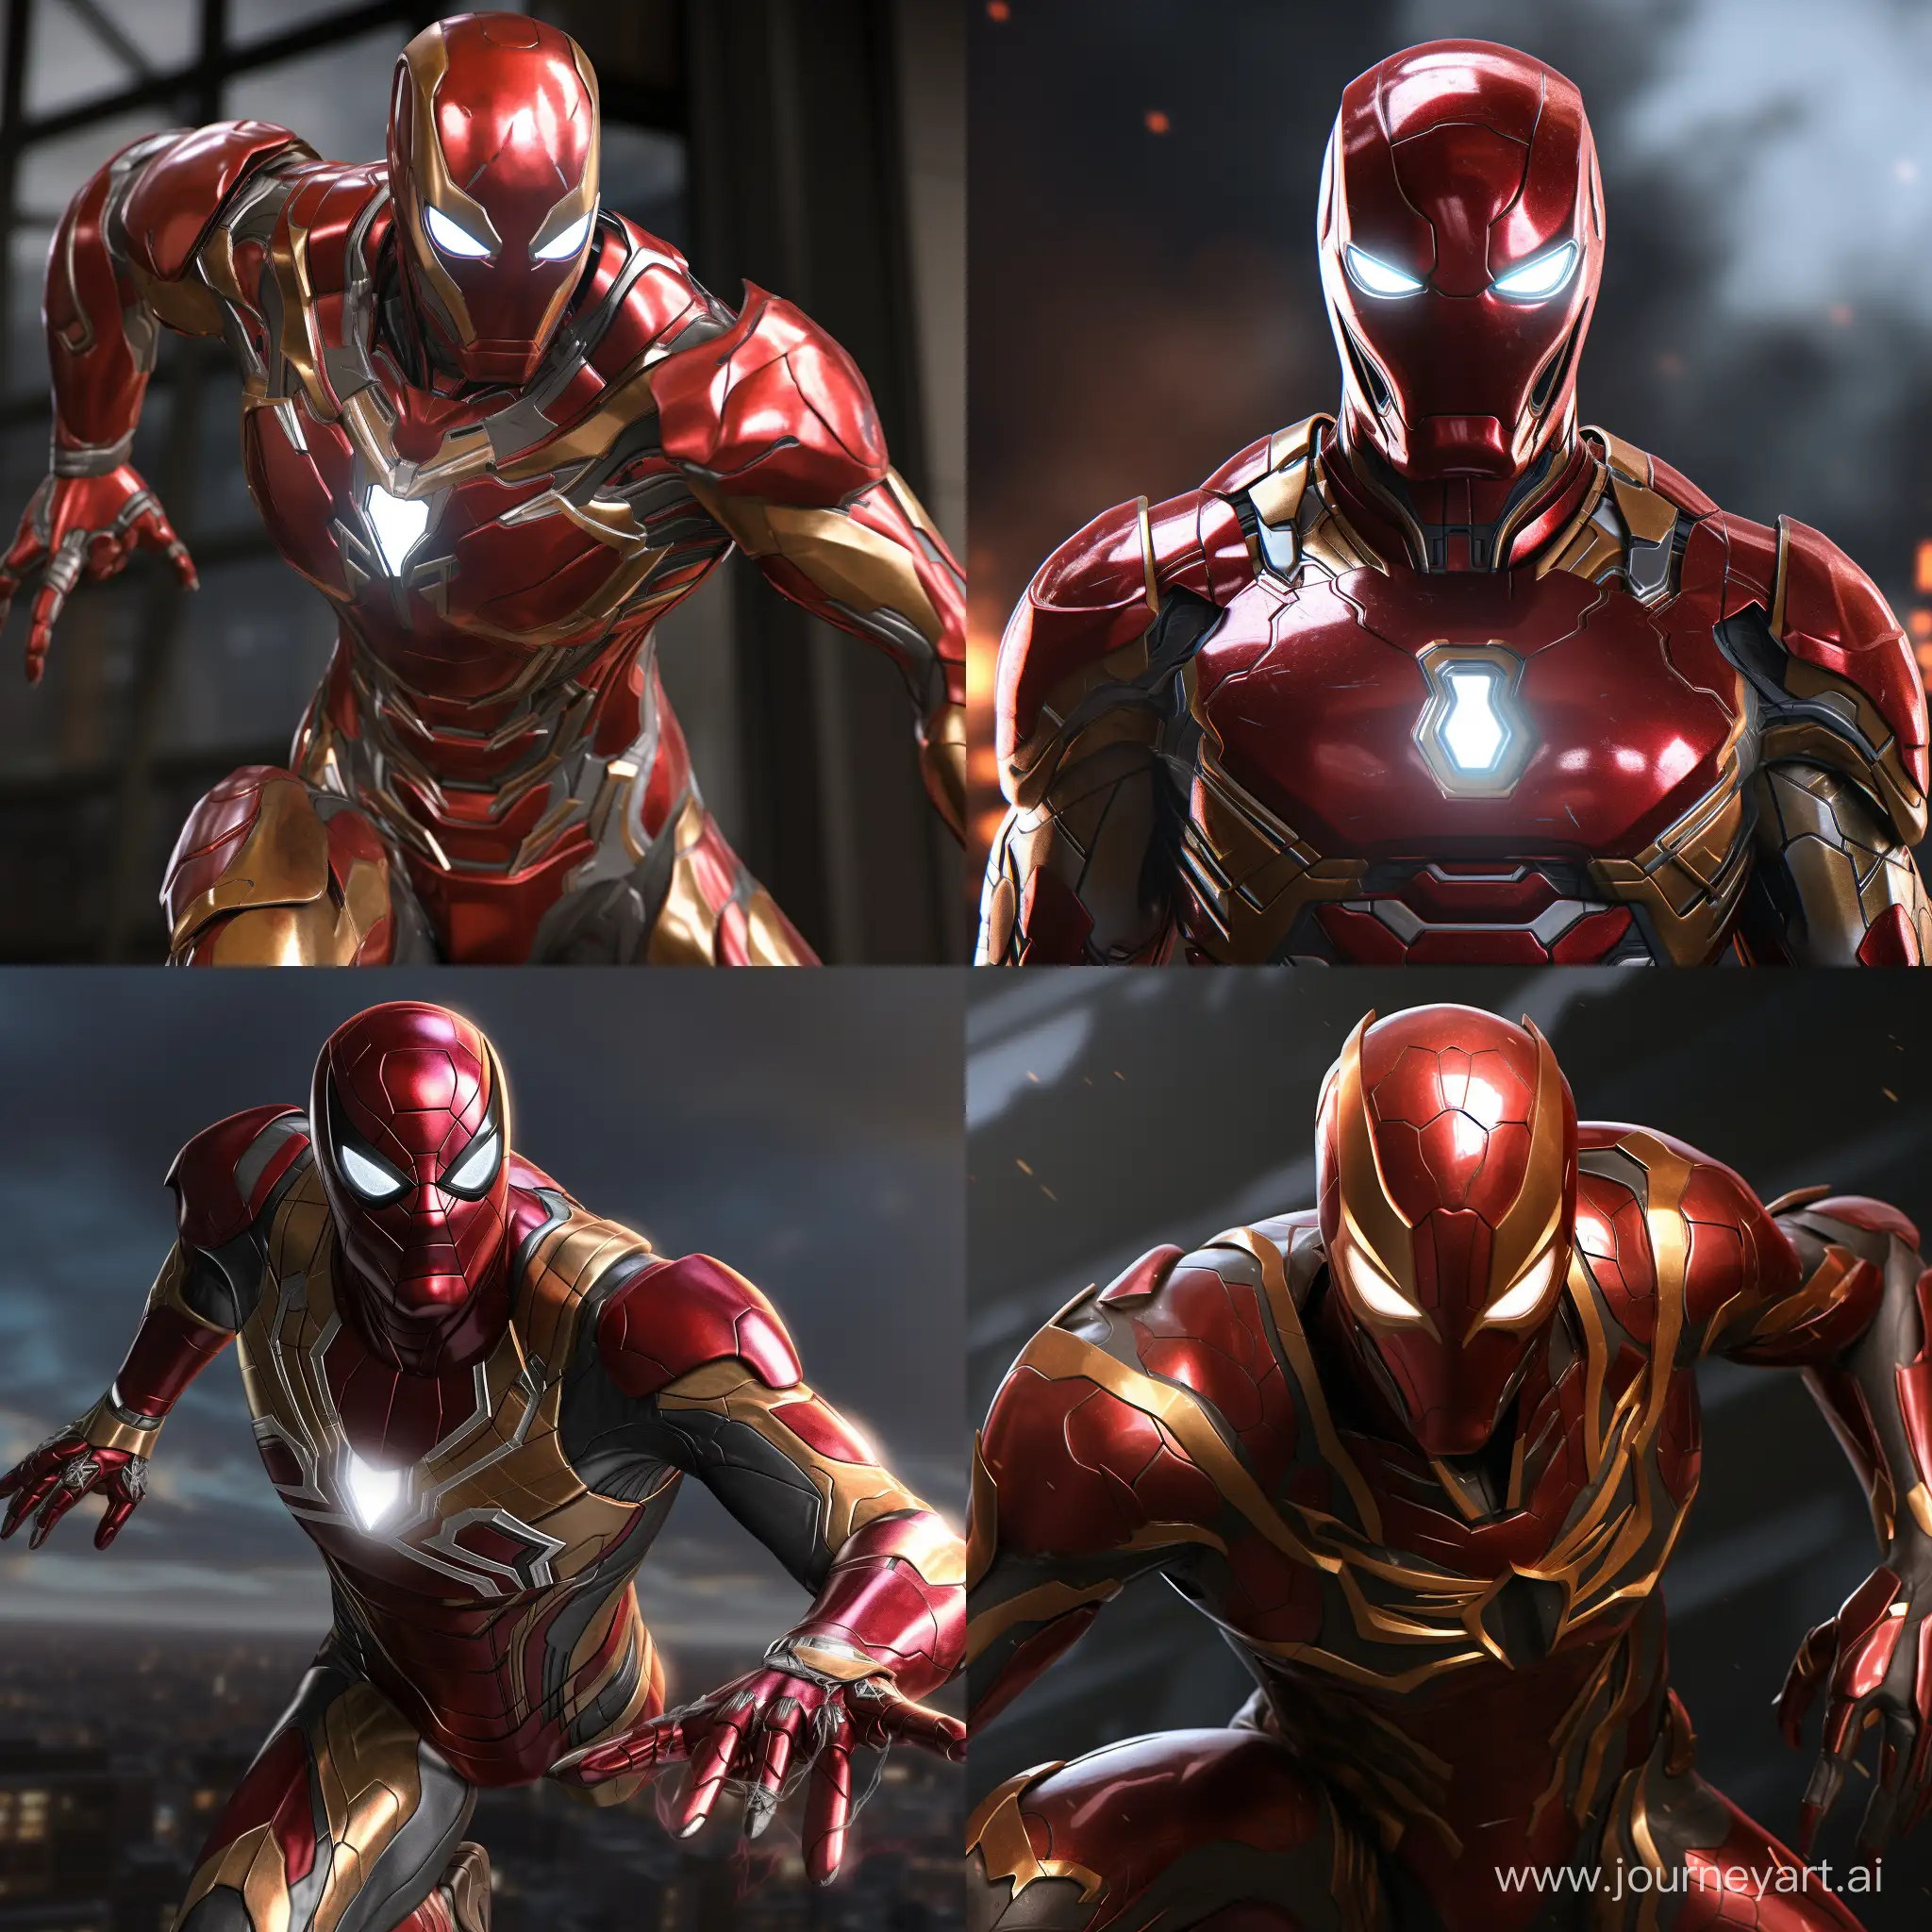 SpiderMan-Redesigned-with-Iron-Man-Flair-in-Stunning-HD